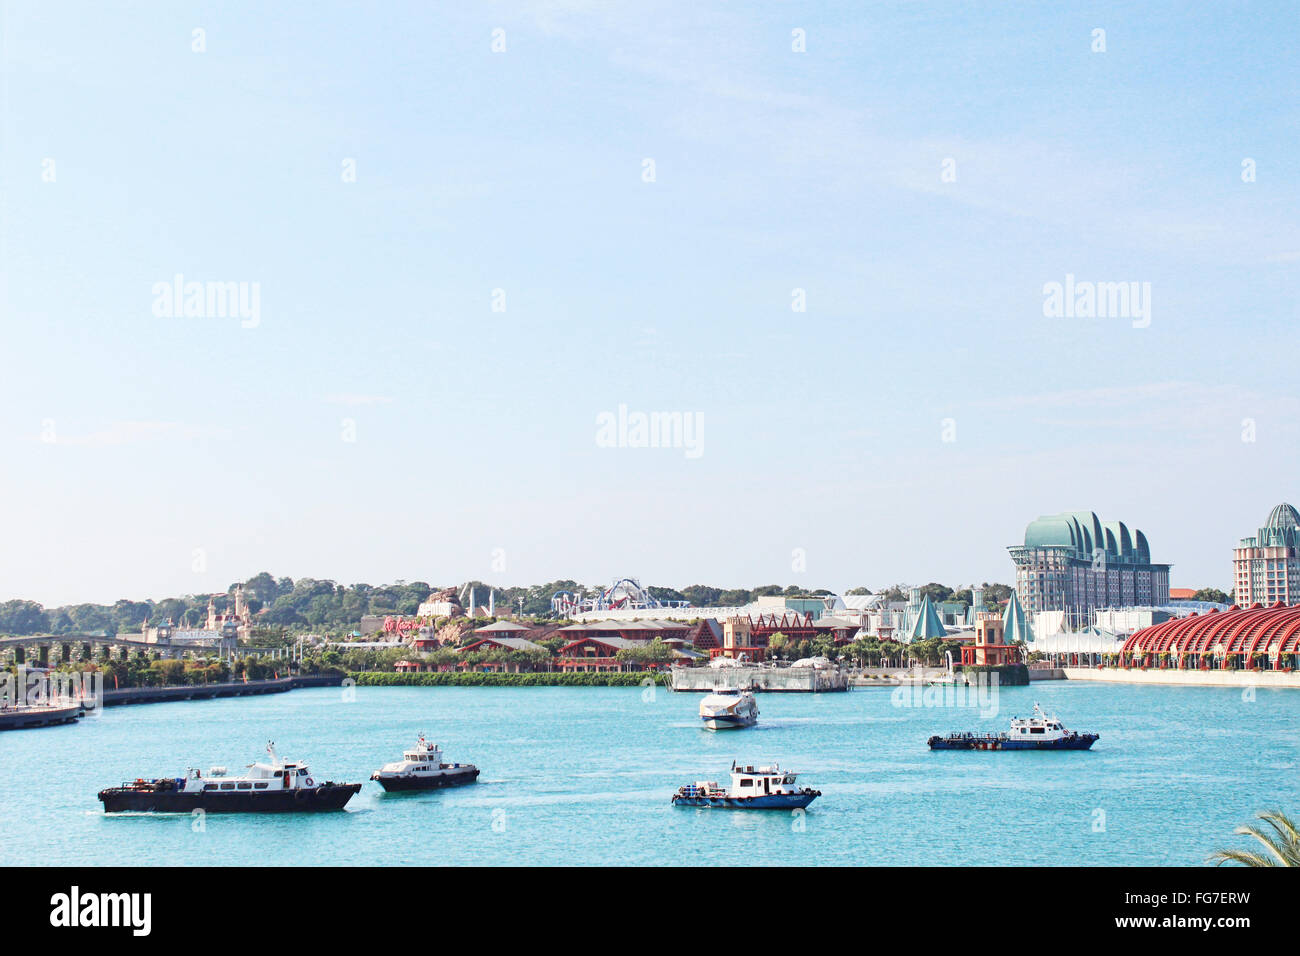 Landscape of Resorts World Sentosa Singapore as seen from roof deck of Vivo City Stock Photo